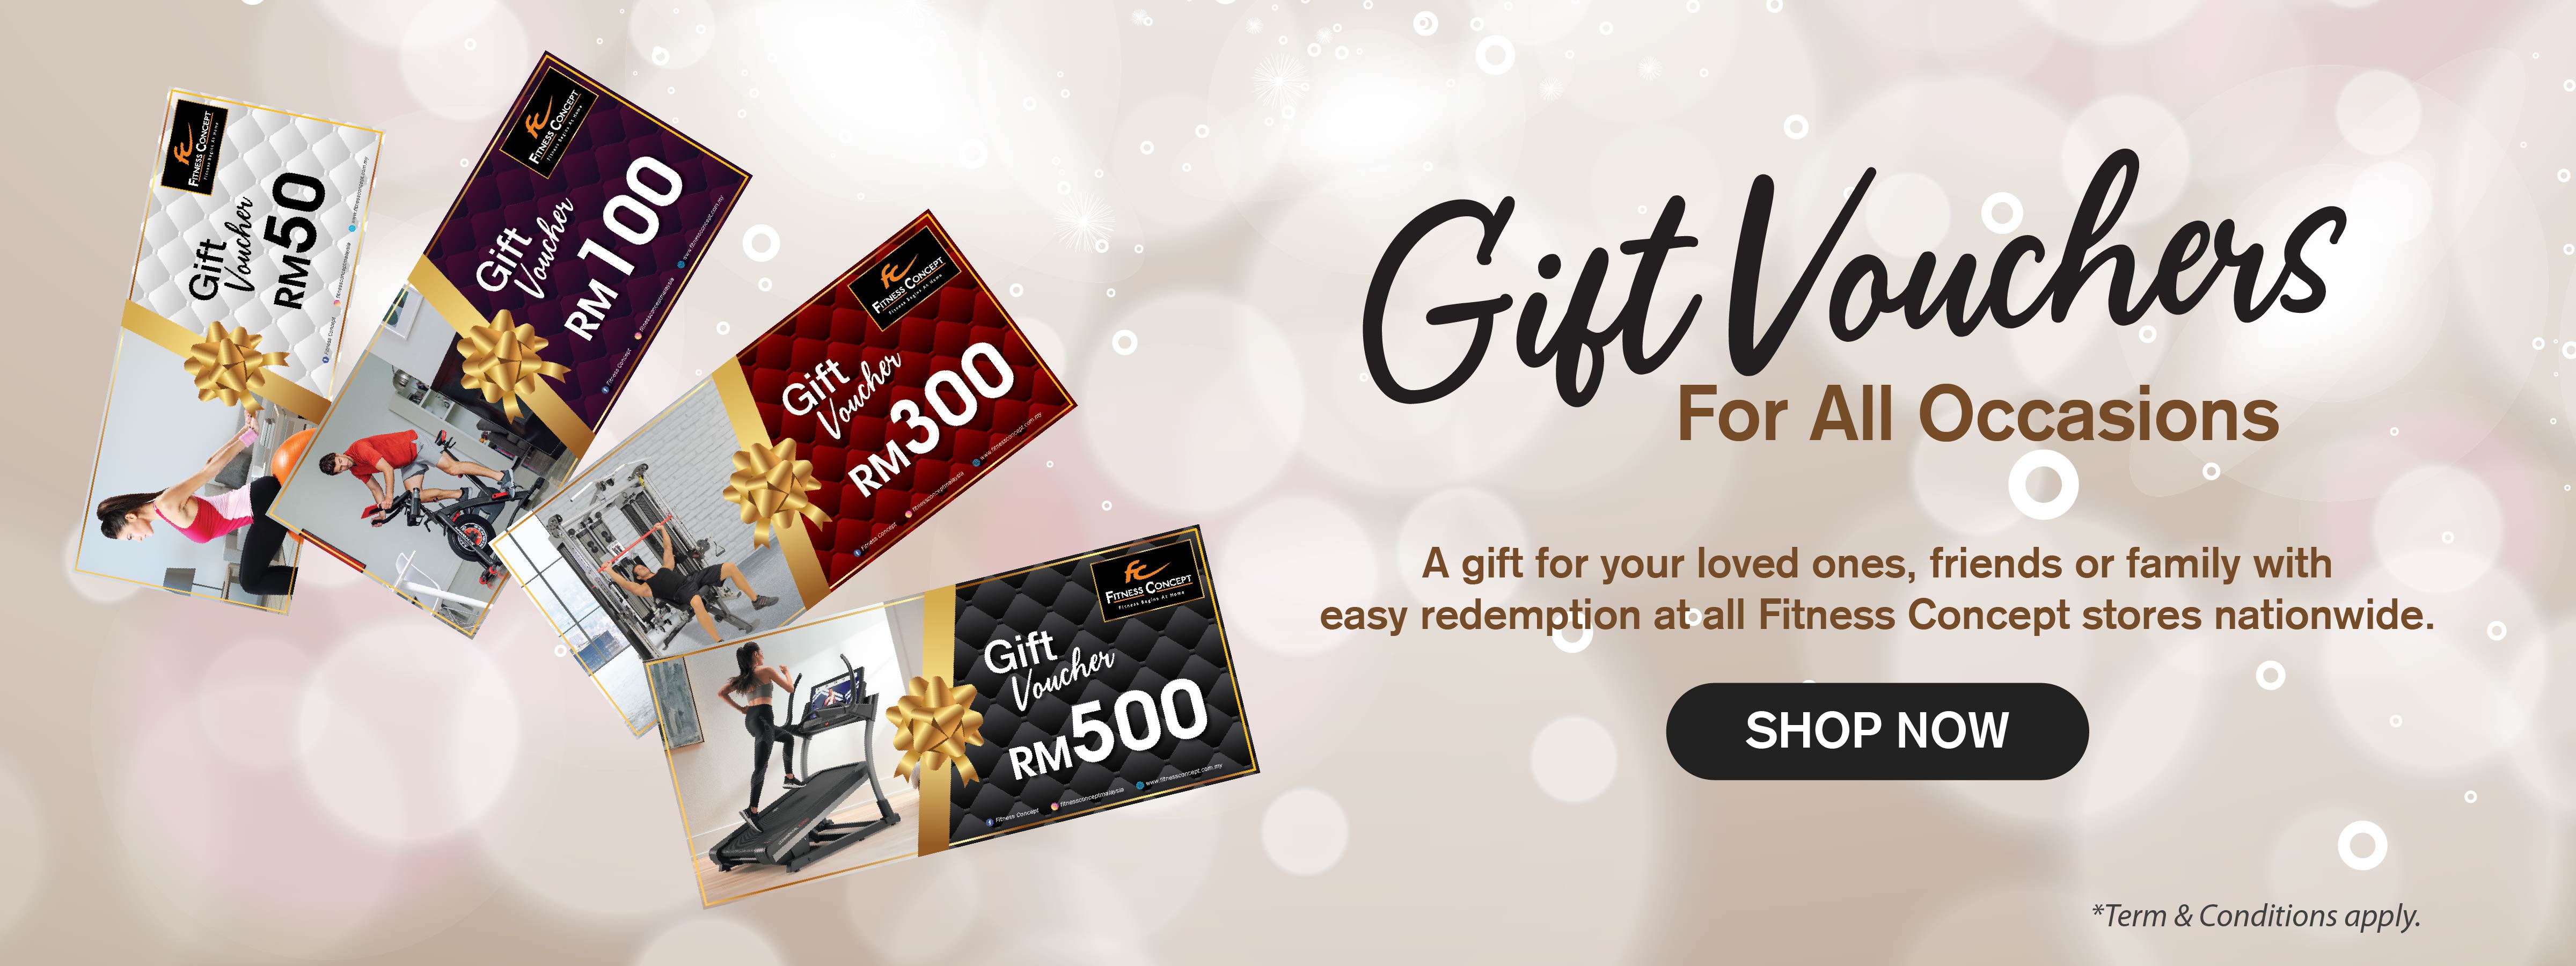 FC Gift Vouchers For All Occasions